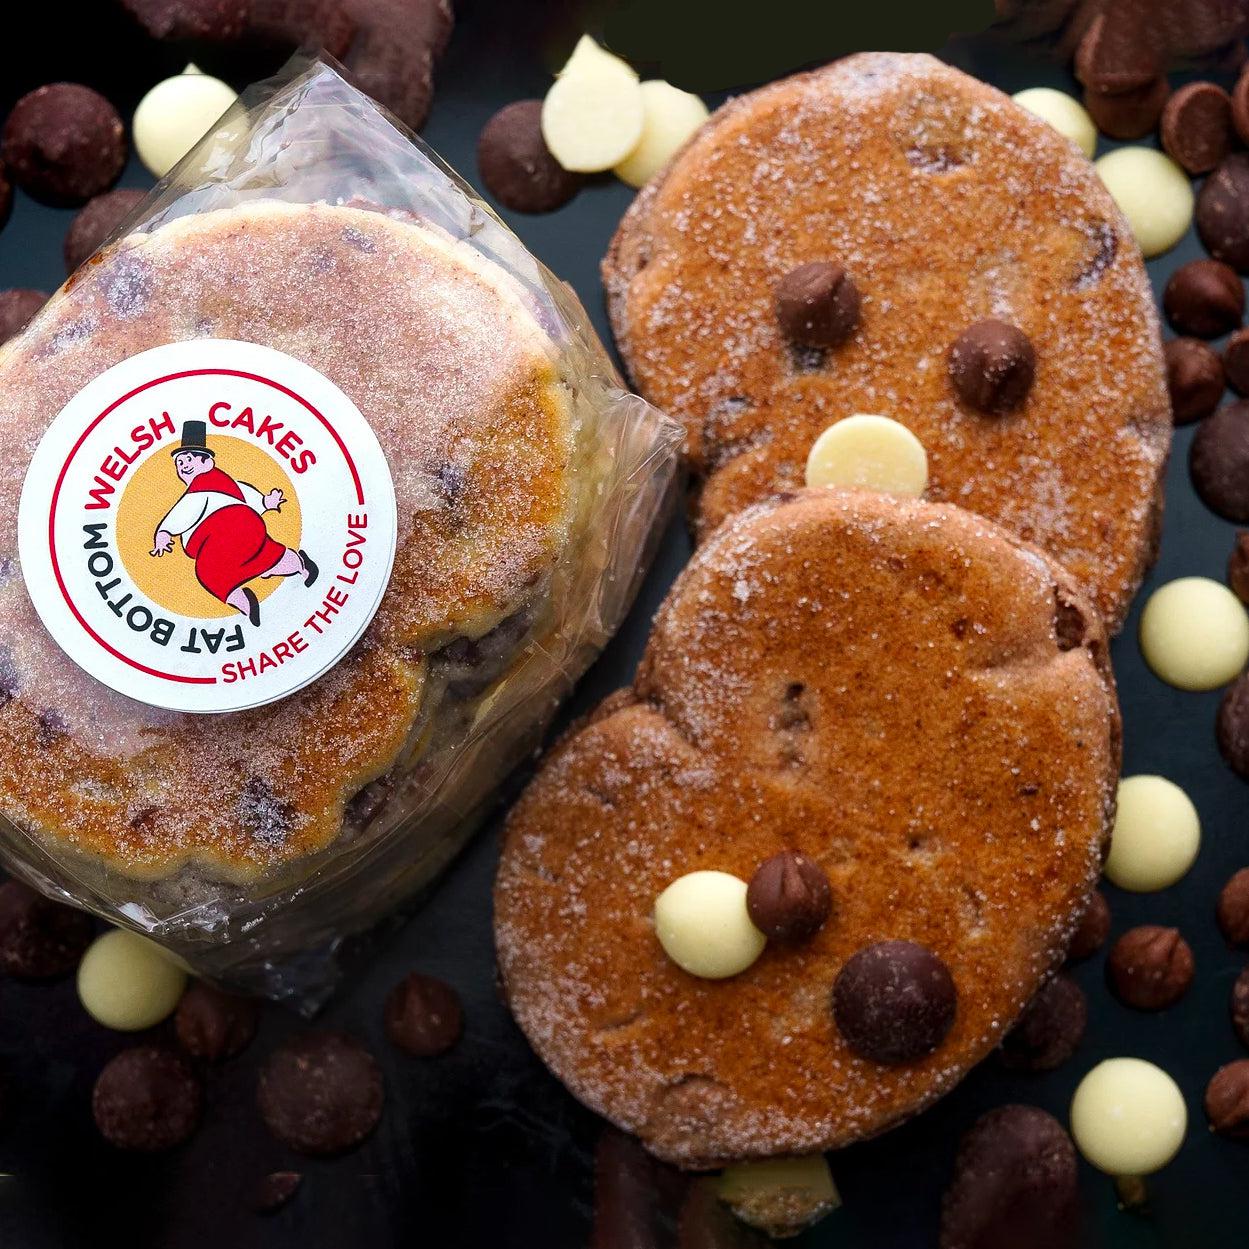 Welsh Cakes - Fat Bottom - Triple Chocolate (1st Class Postage Included)